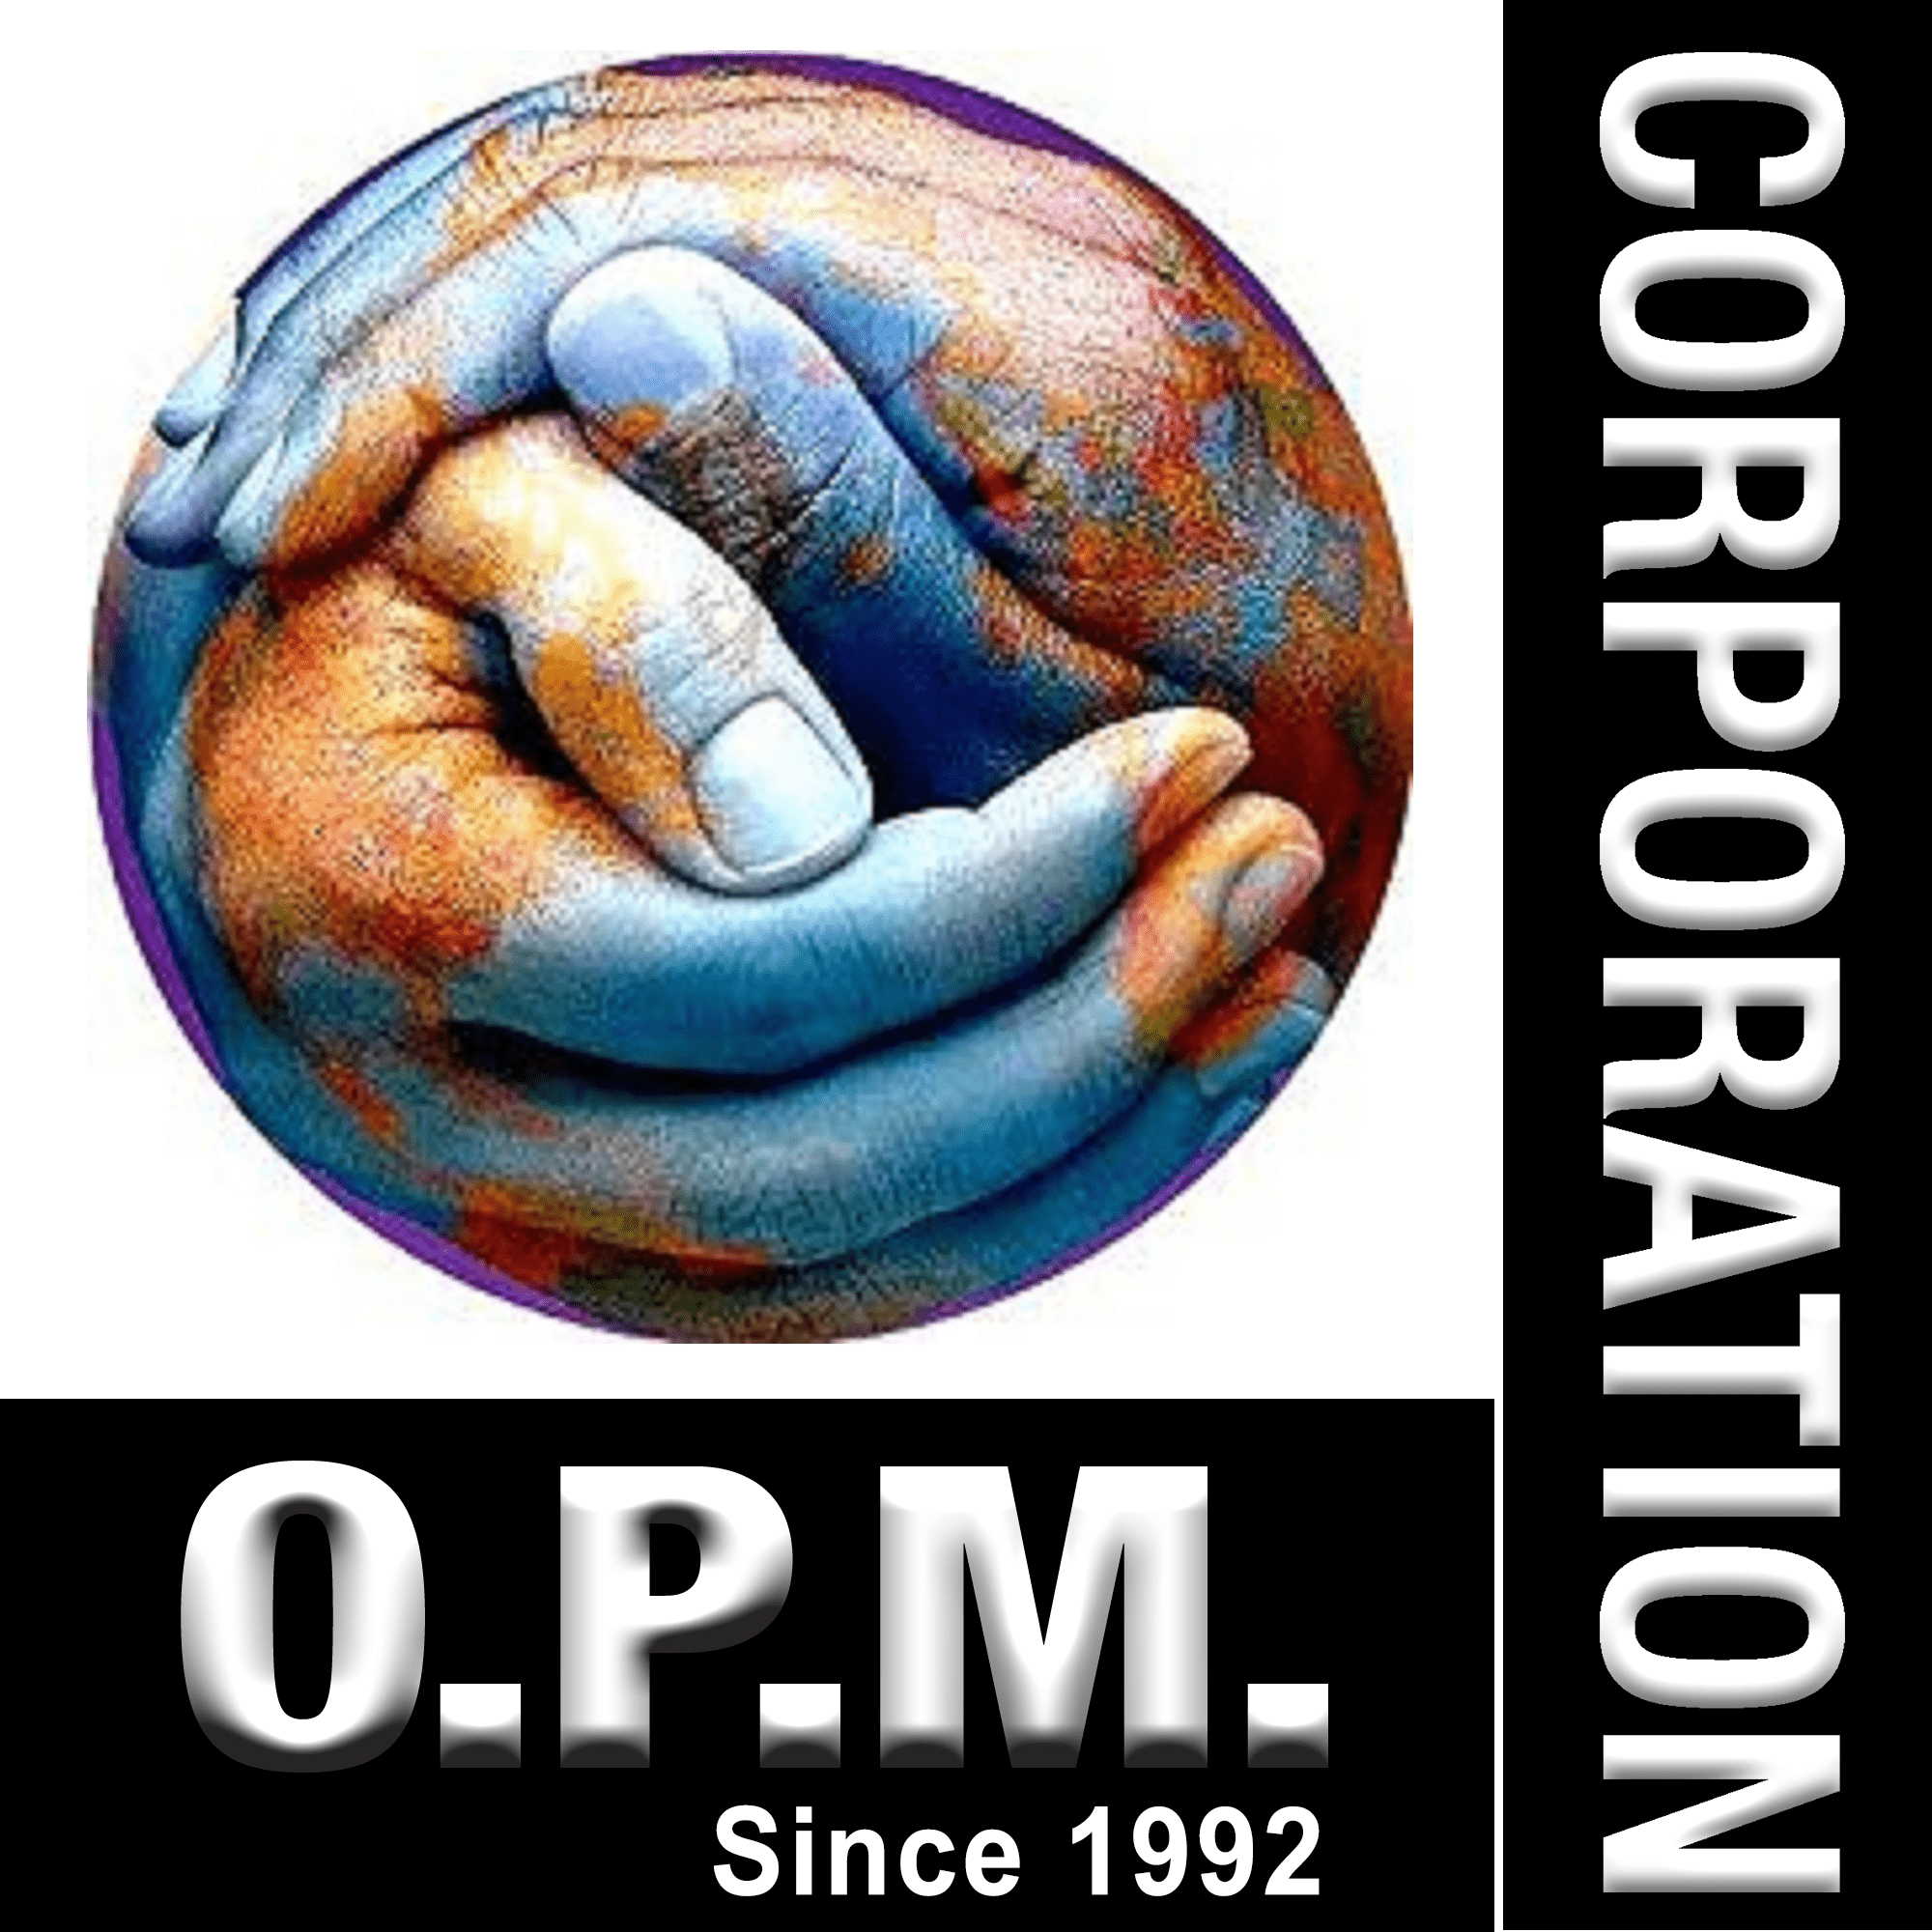 The OPM CORPORATION Network